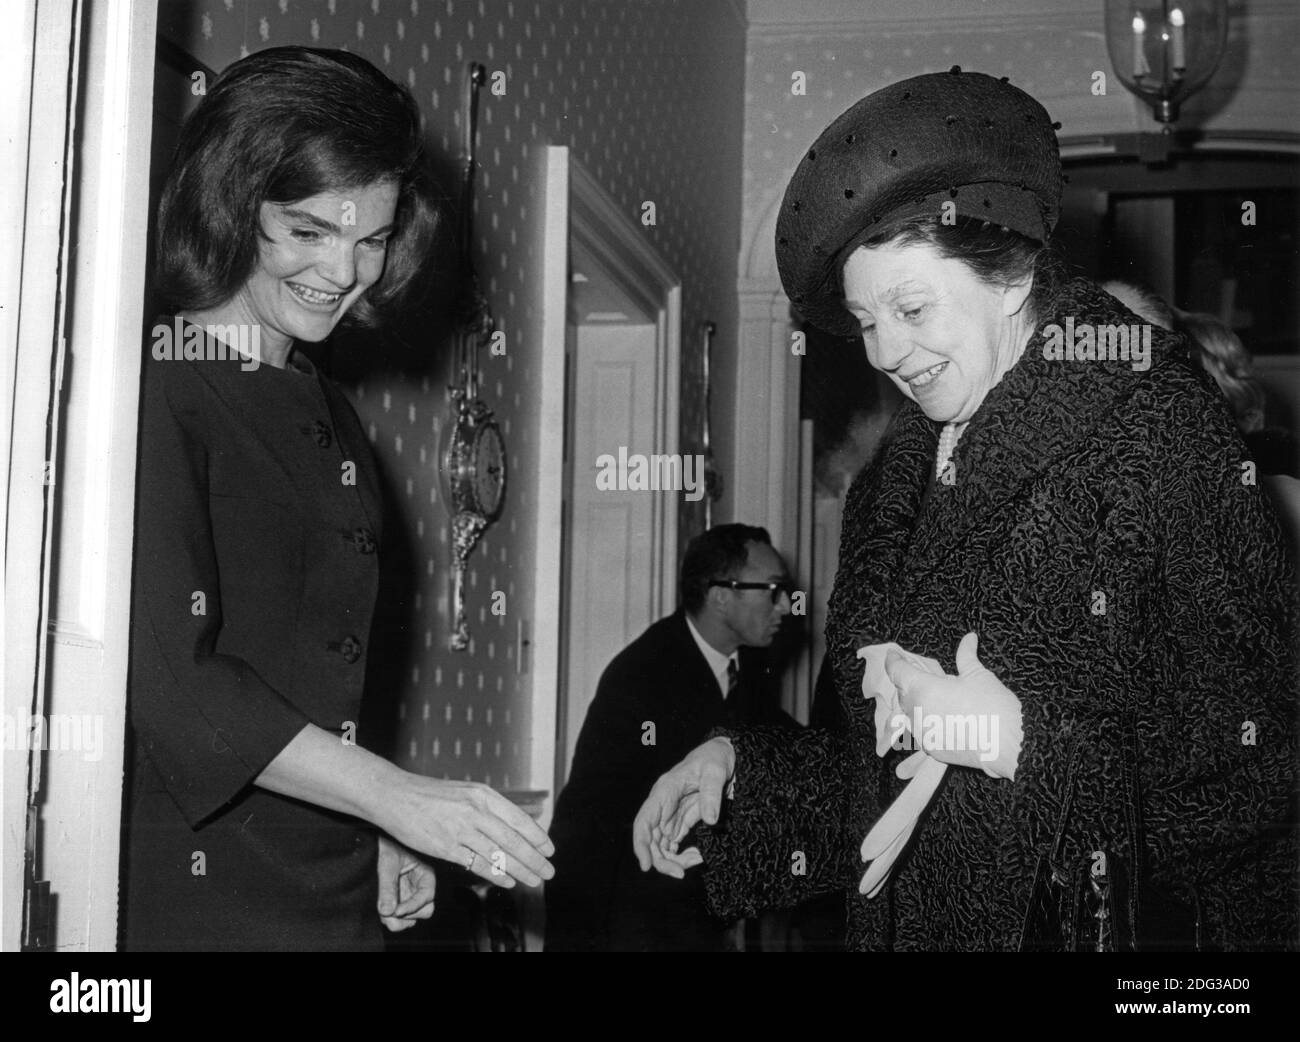 Former first lady Jacqueline Bouvier Kennedy, left, welcomes Laura Carta Camprino, wife of President Antonio Segni of Italy, right, to her Georgetown home in Washington, DC, USA, on January 14, 1964. Mrs. Segni had tea with the former first lady for a half hour while her husband met with United States President Lyndon B. Johnson at the White House. Photo by Benjamin E. 'Gene' Forte / CNP Stock Photo